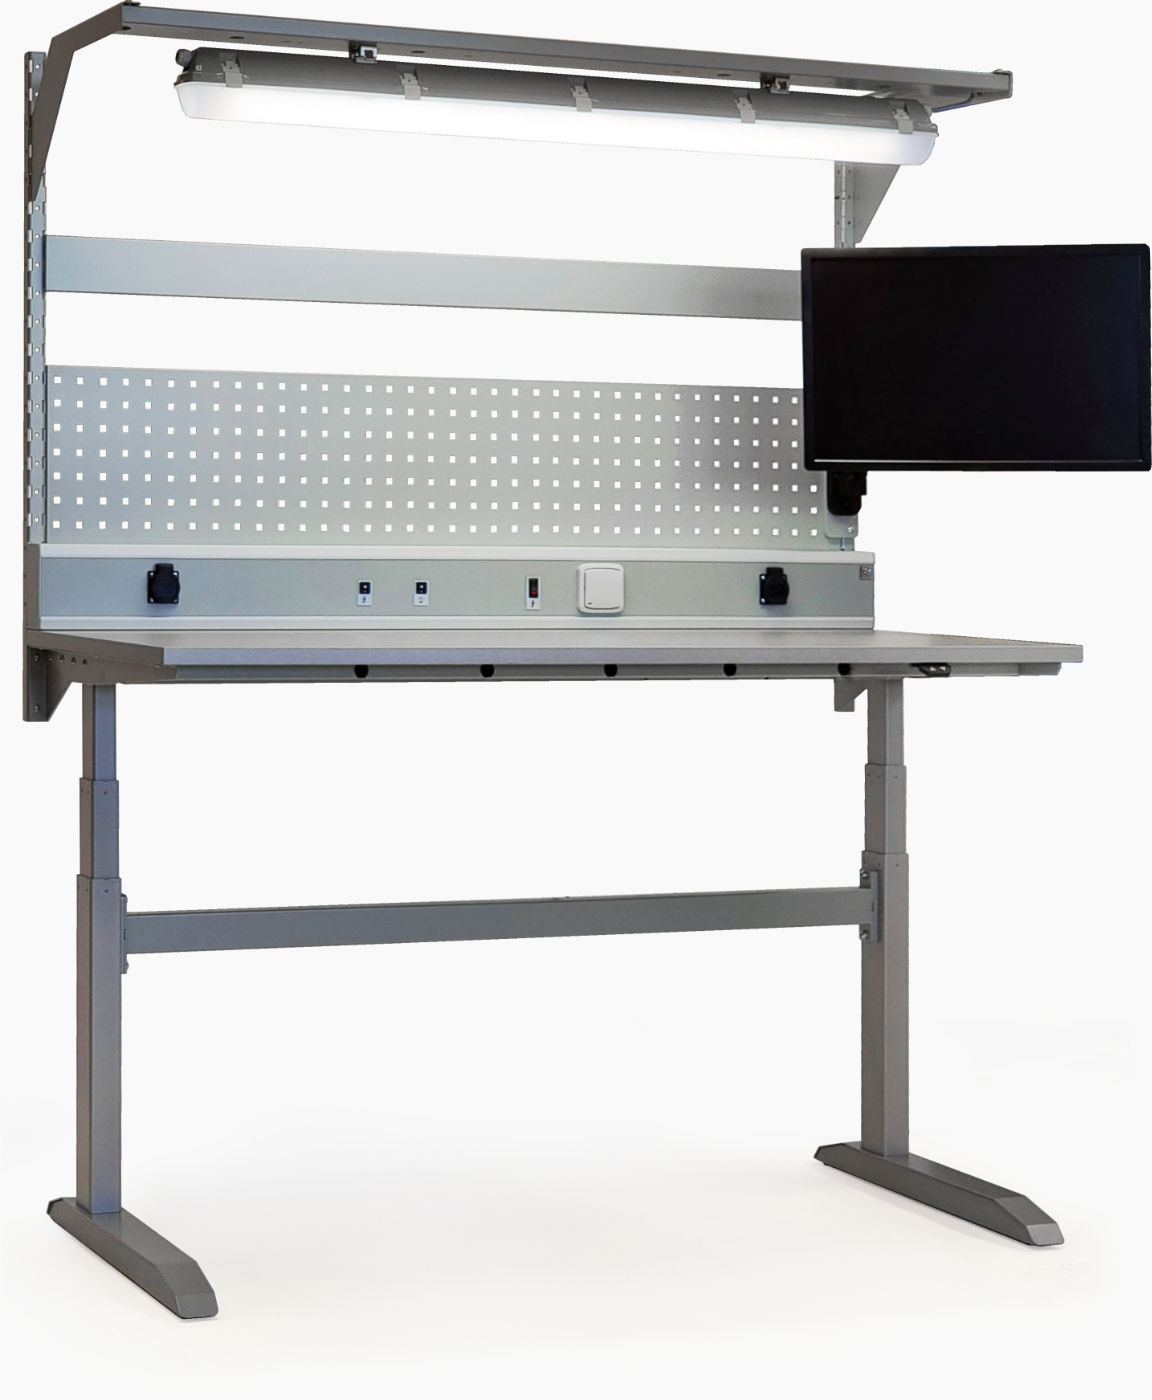 Height-adjustable work desk with an extension, lighting, and monitor holder. 